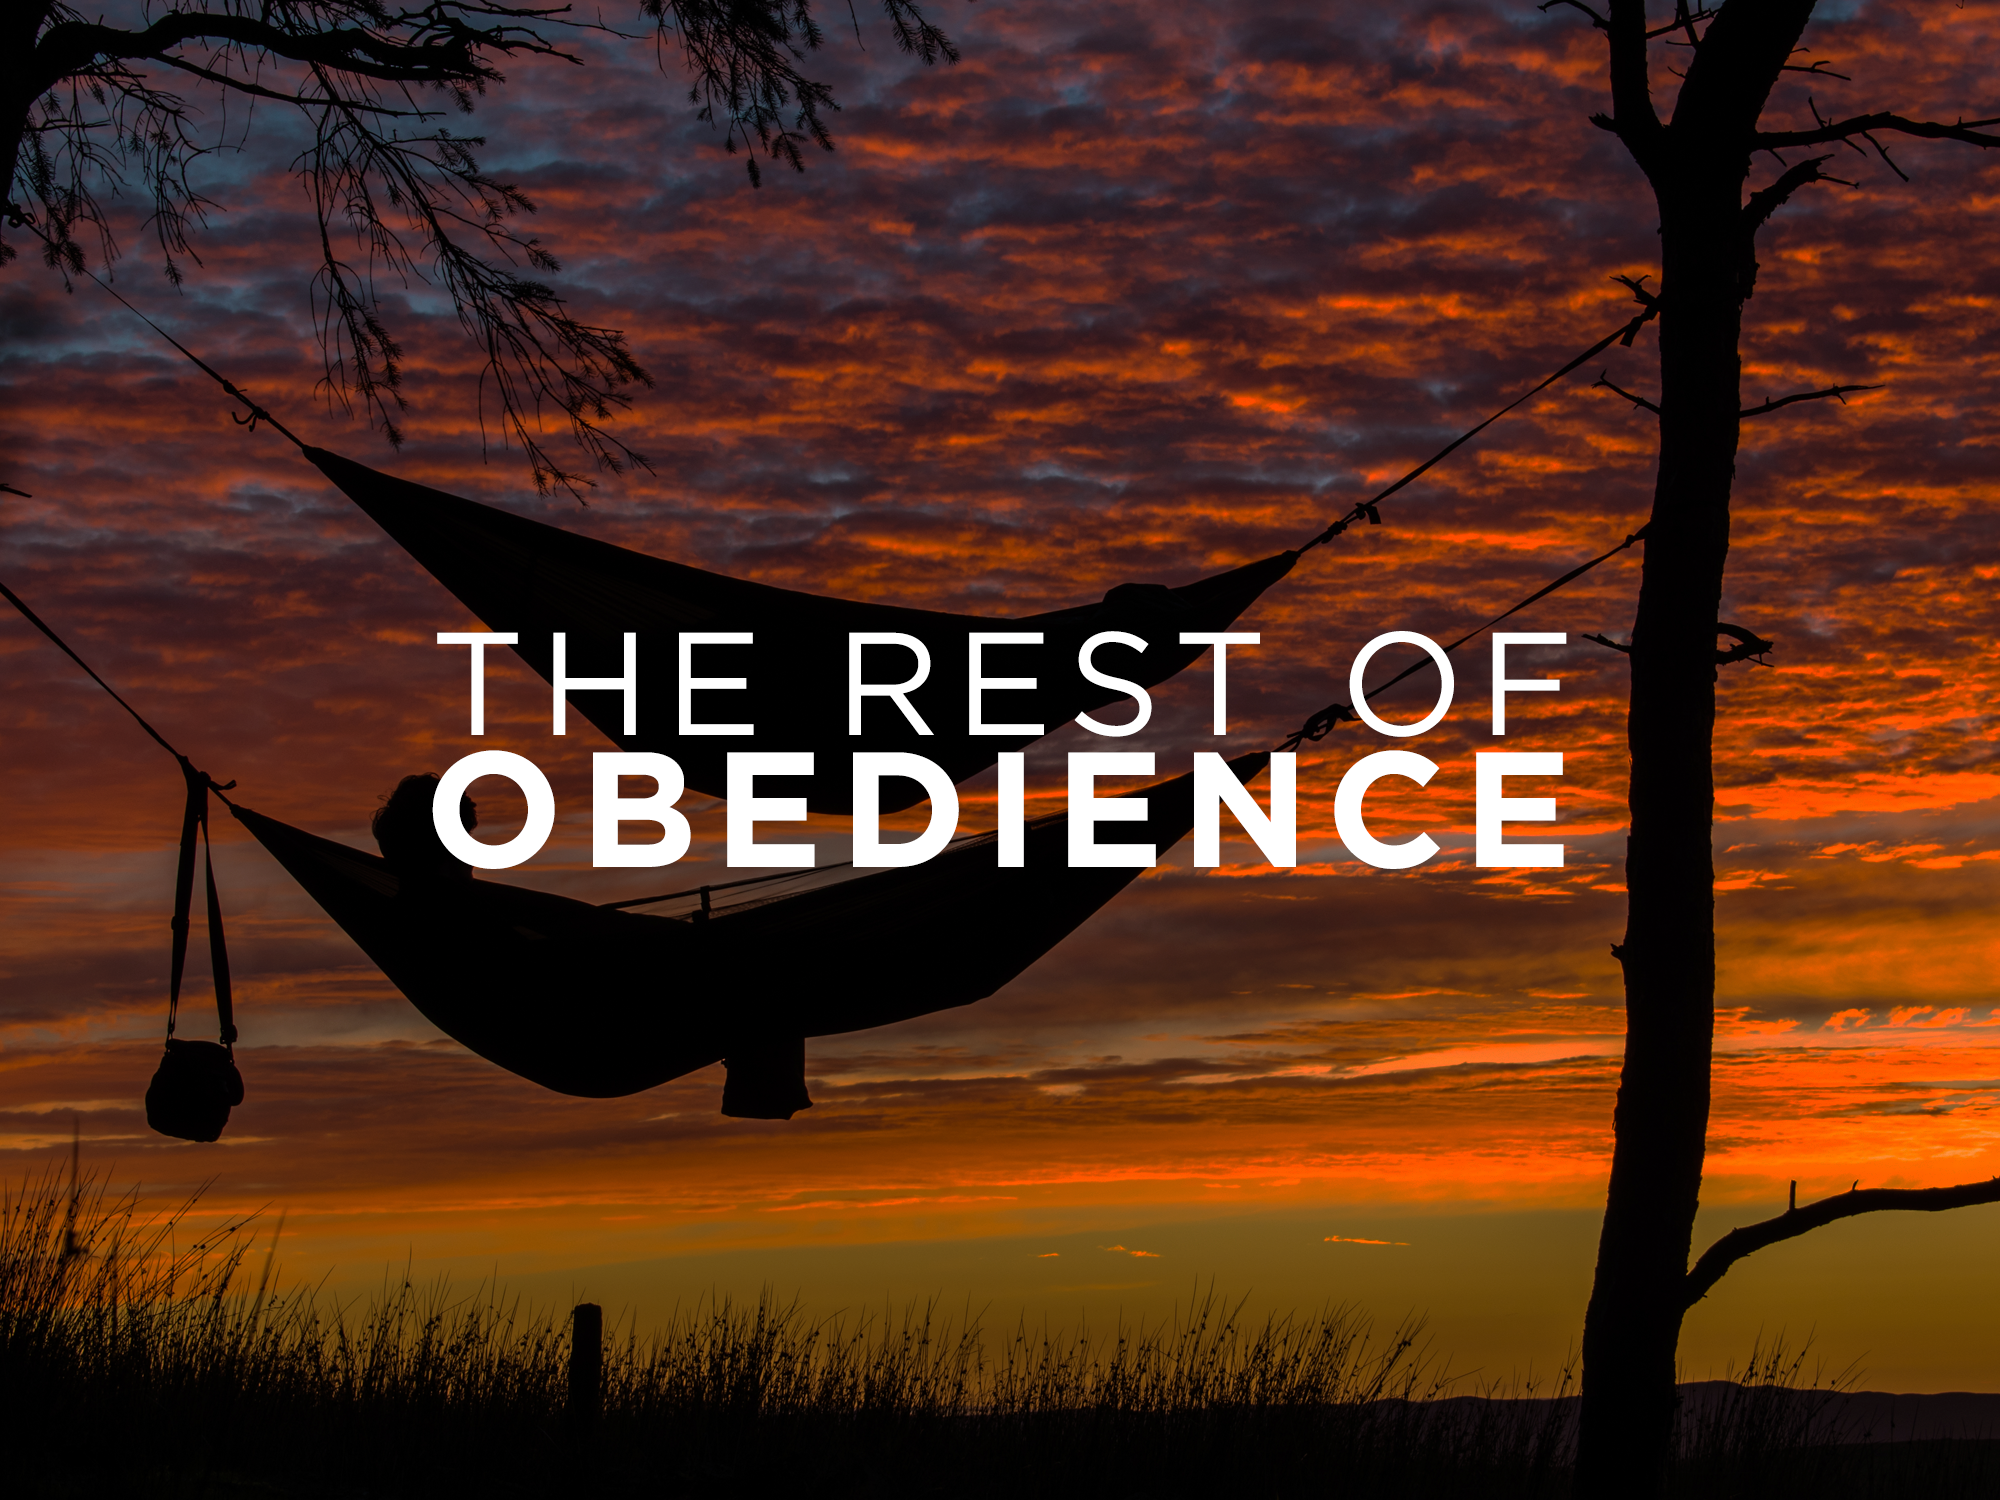 The Rest of Obedience